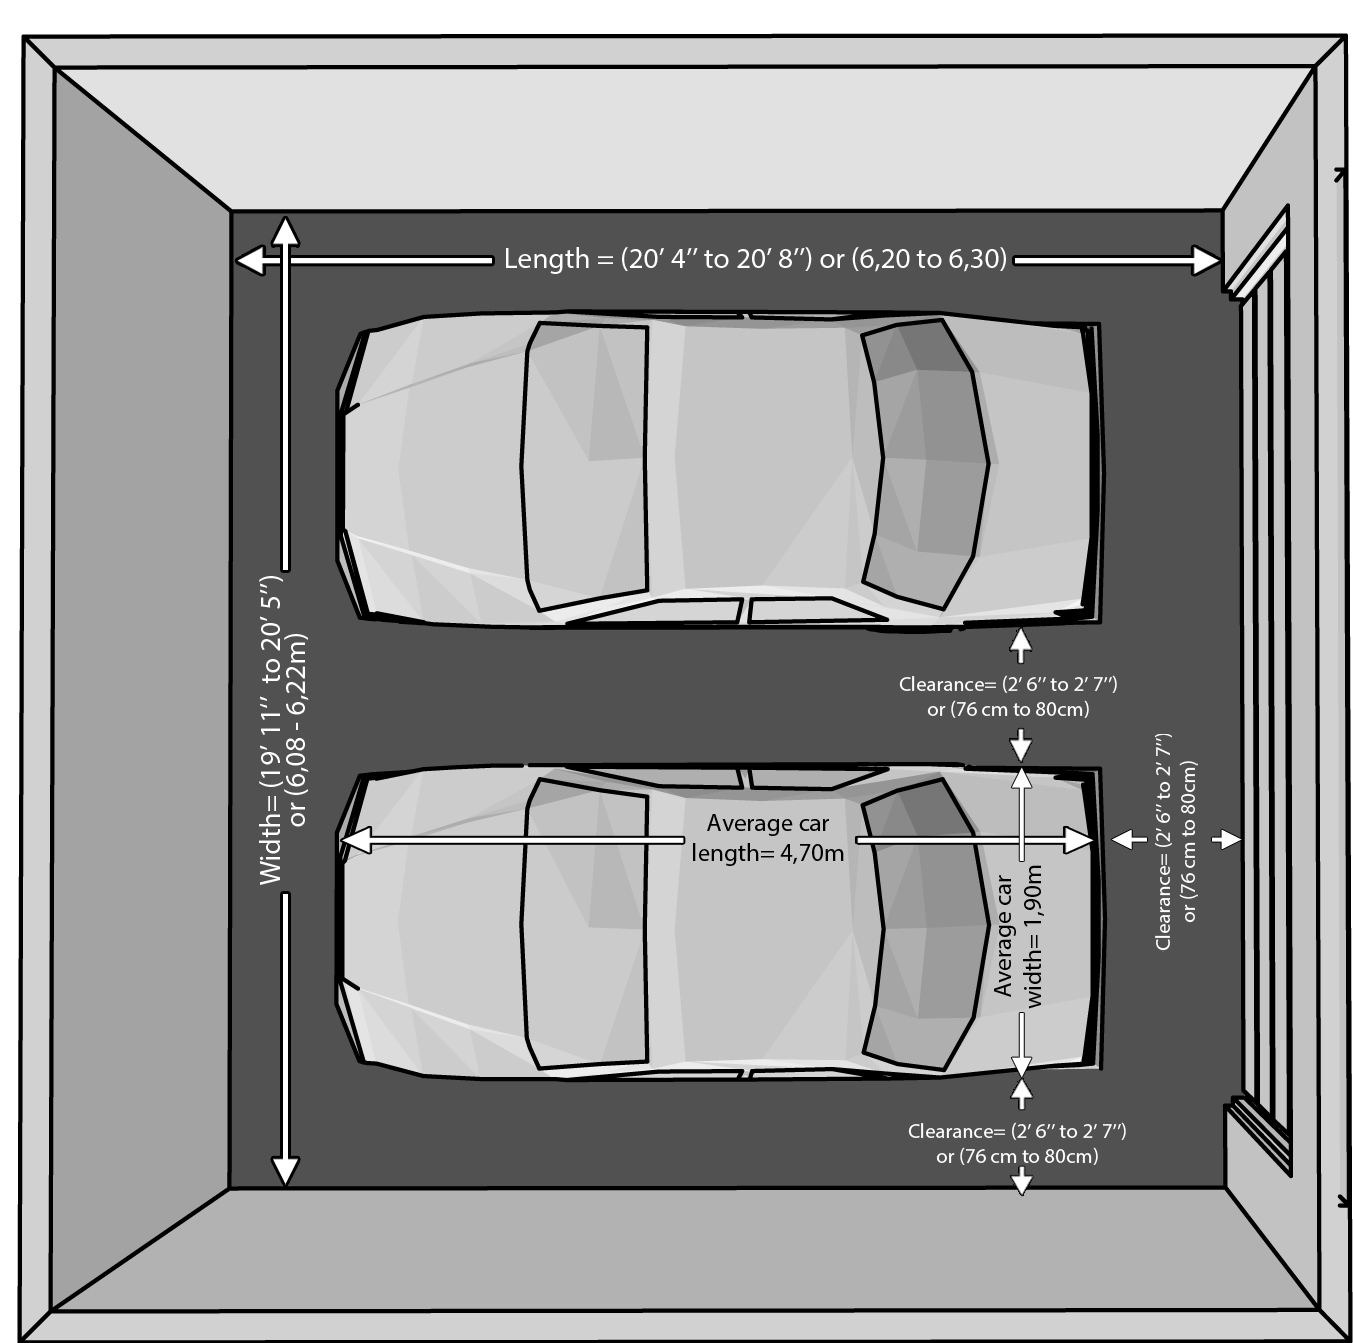 The dimensions of an one car and a two car garage